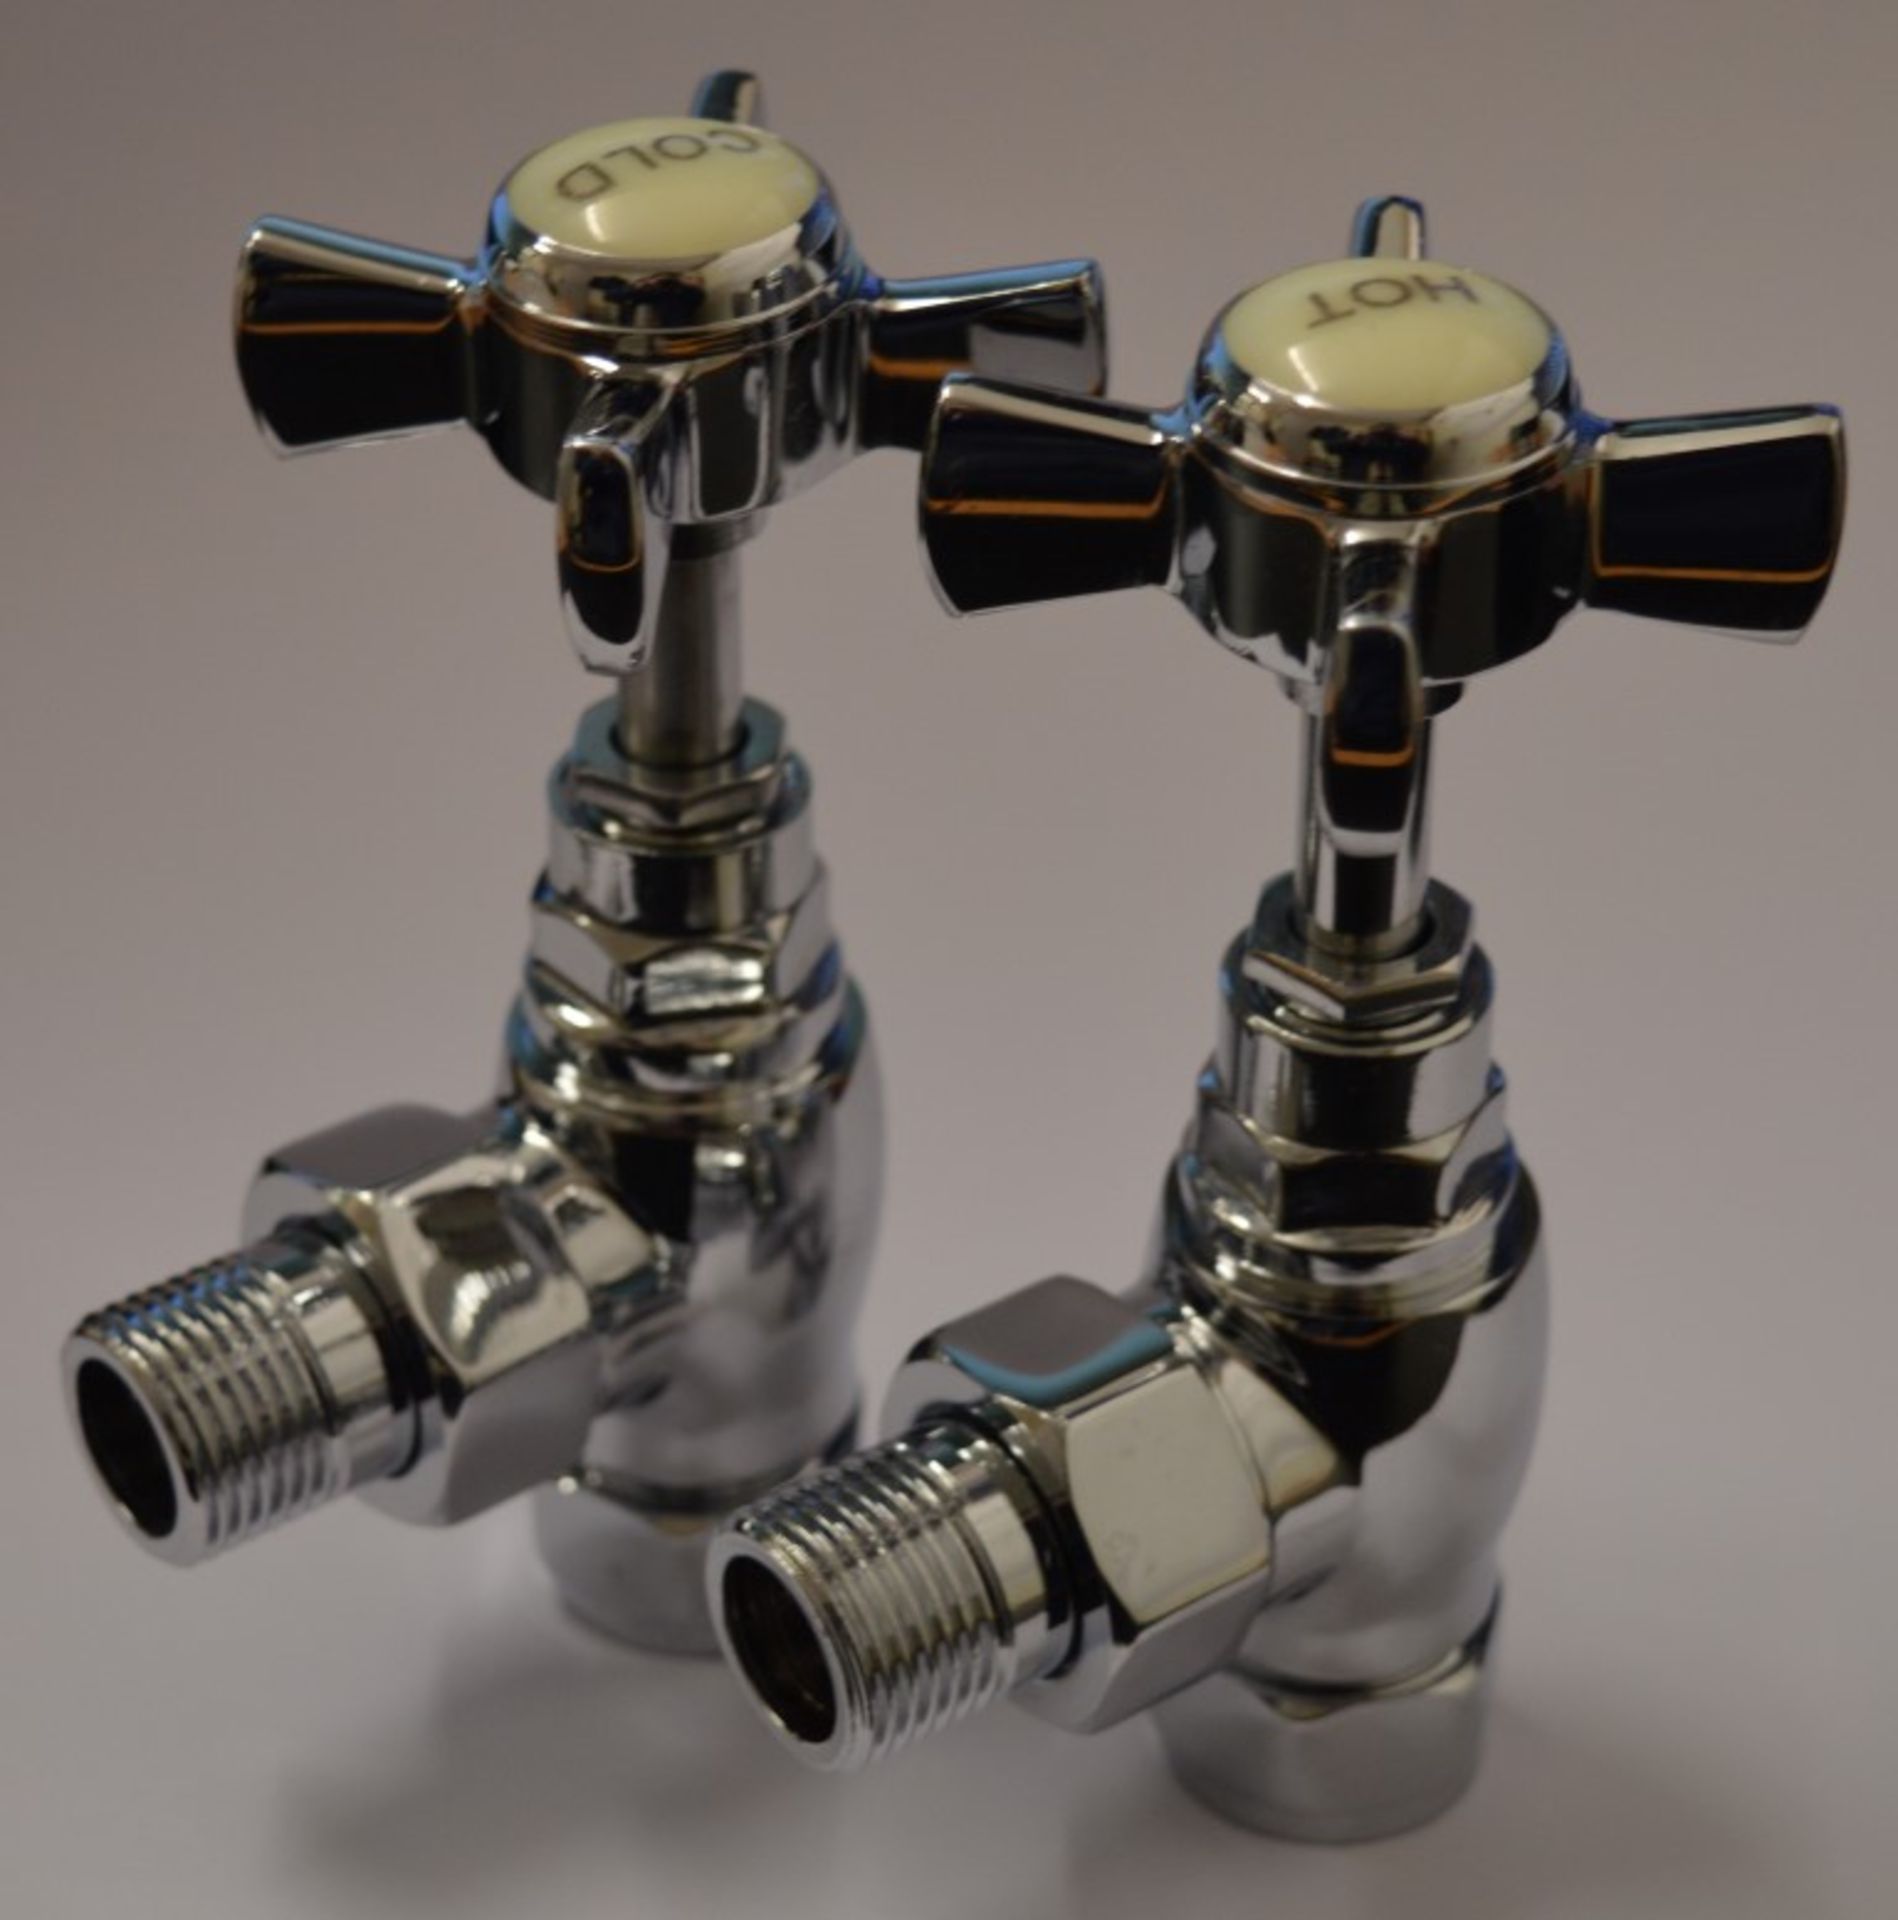 10 x Vogue Bathrooms Pairs of Classical Chrome Radiator Valves - Product Code: VKRADC1 - Brand New - Image 6 of 10